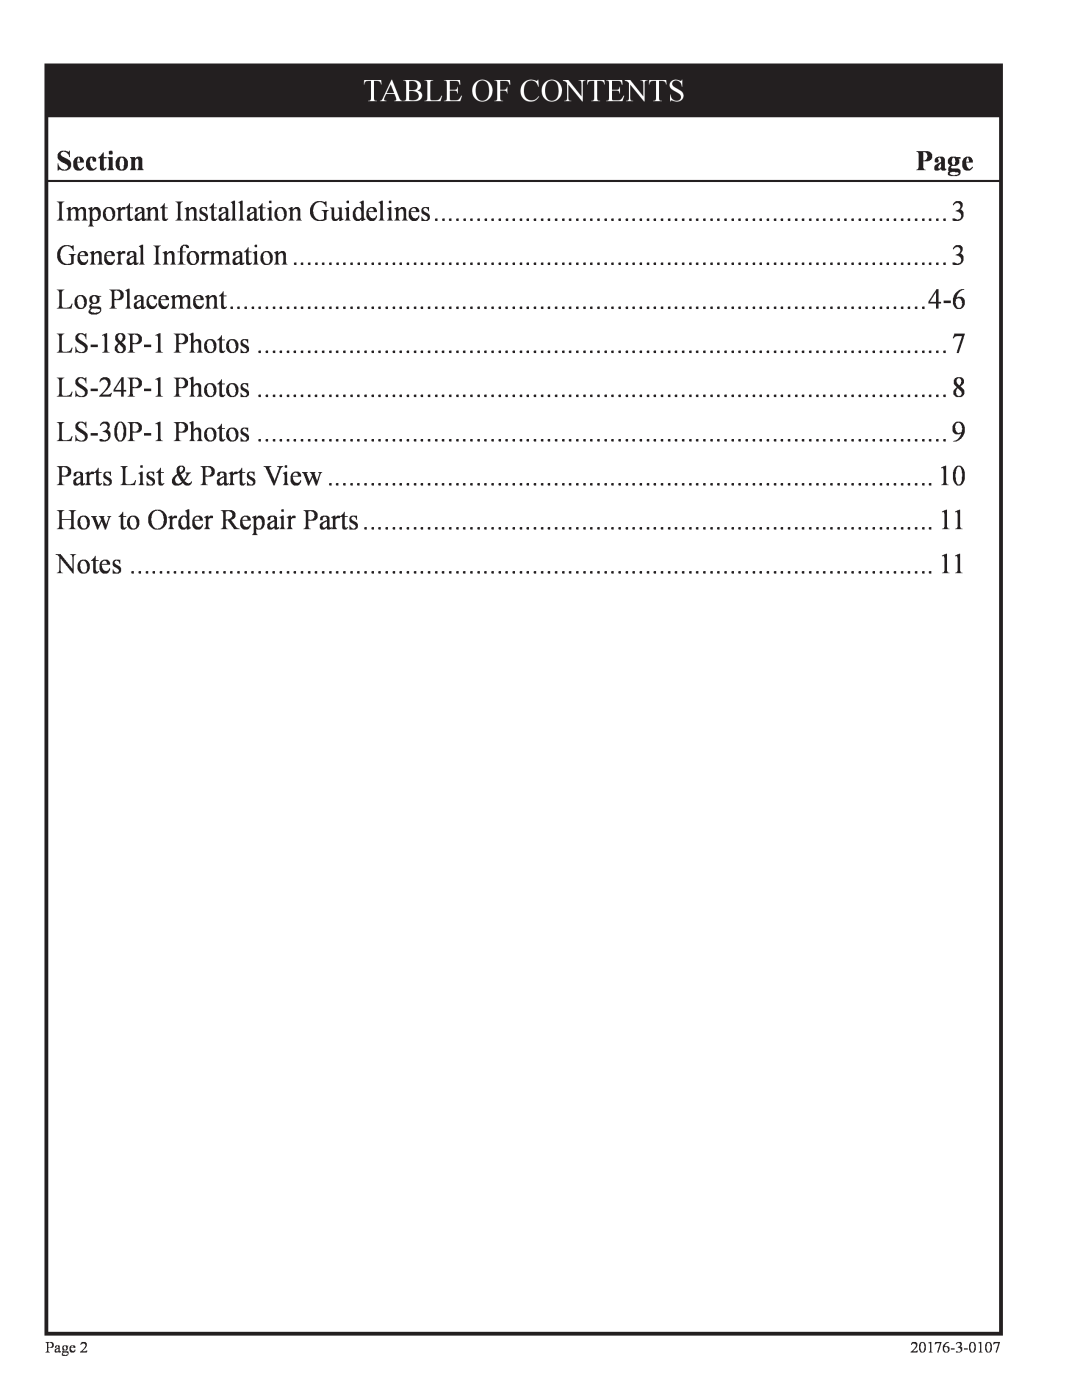 Empire Comfort Systems LS-24P-1, LS-30P-1, LS-18P-1 installation instructions Table Of Contents, Section 